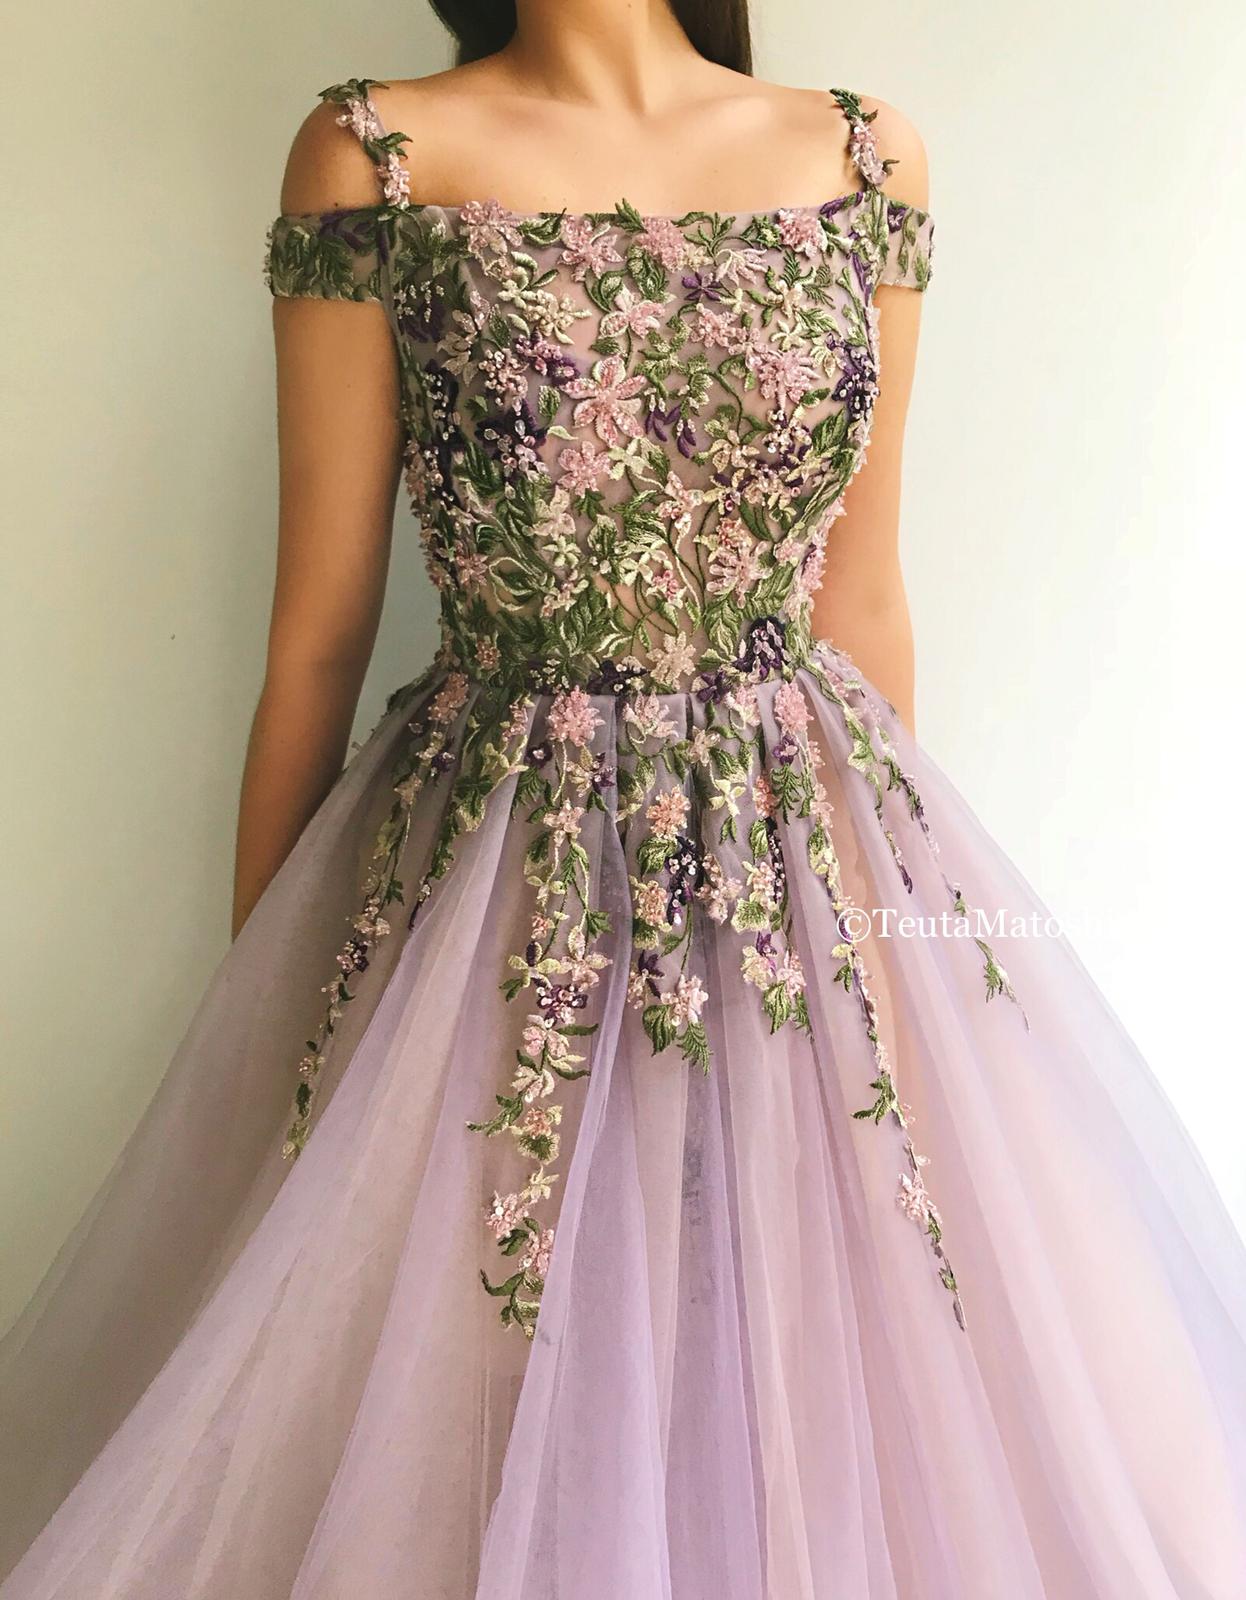 Purple A-Line dress with spaghetti straps, off the shoulder sleeves and embroidery